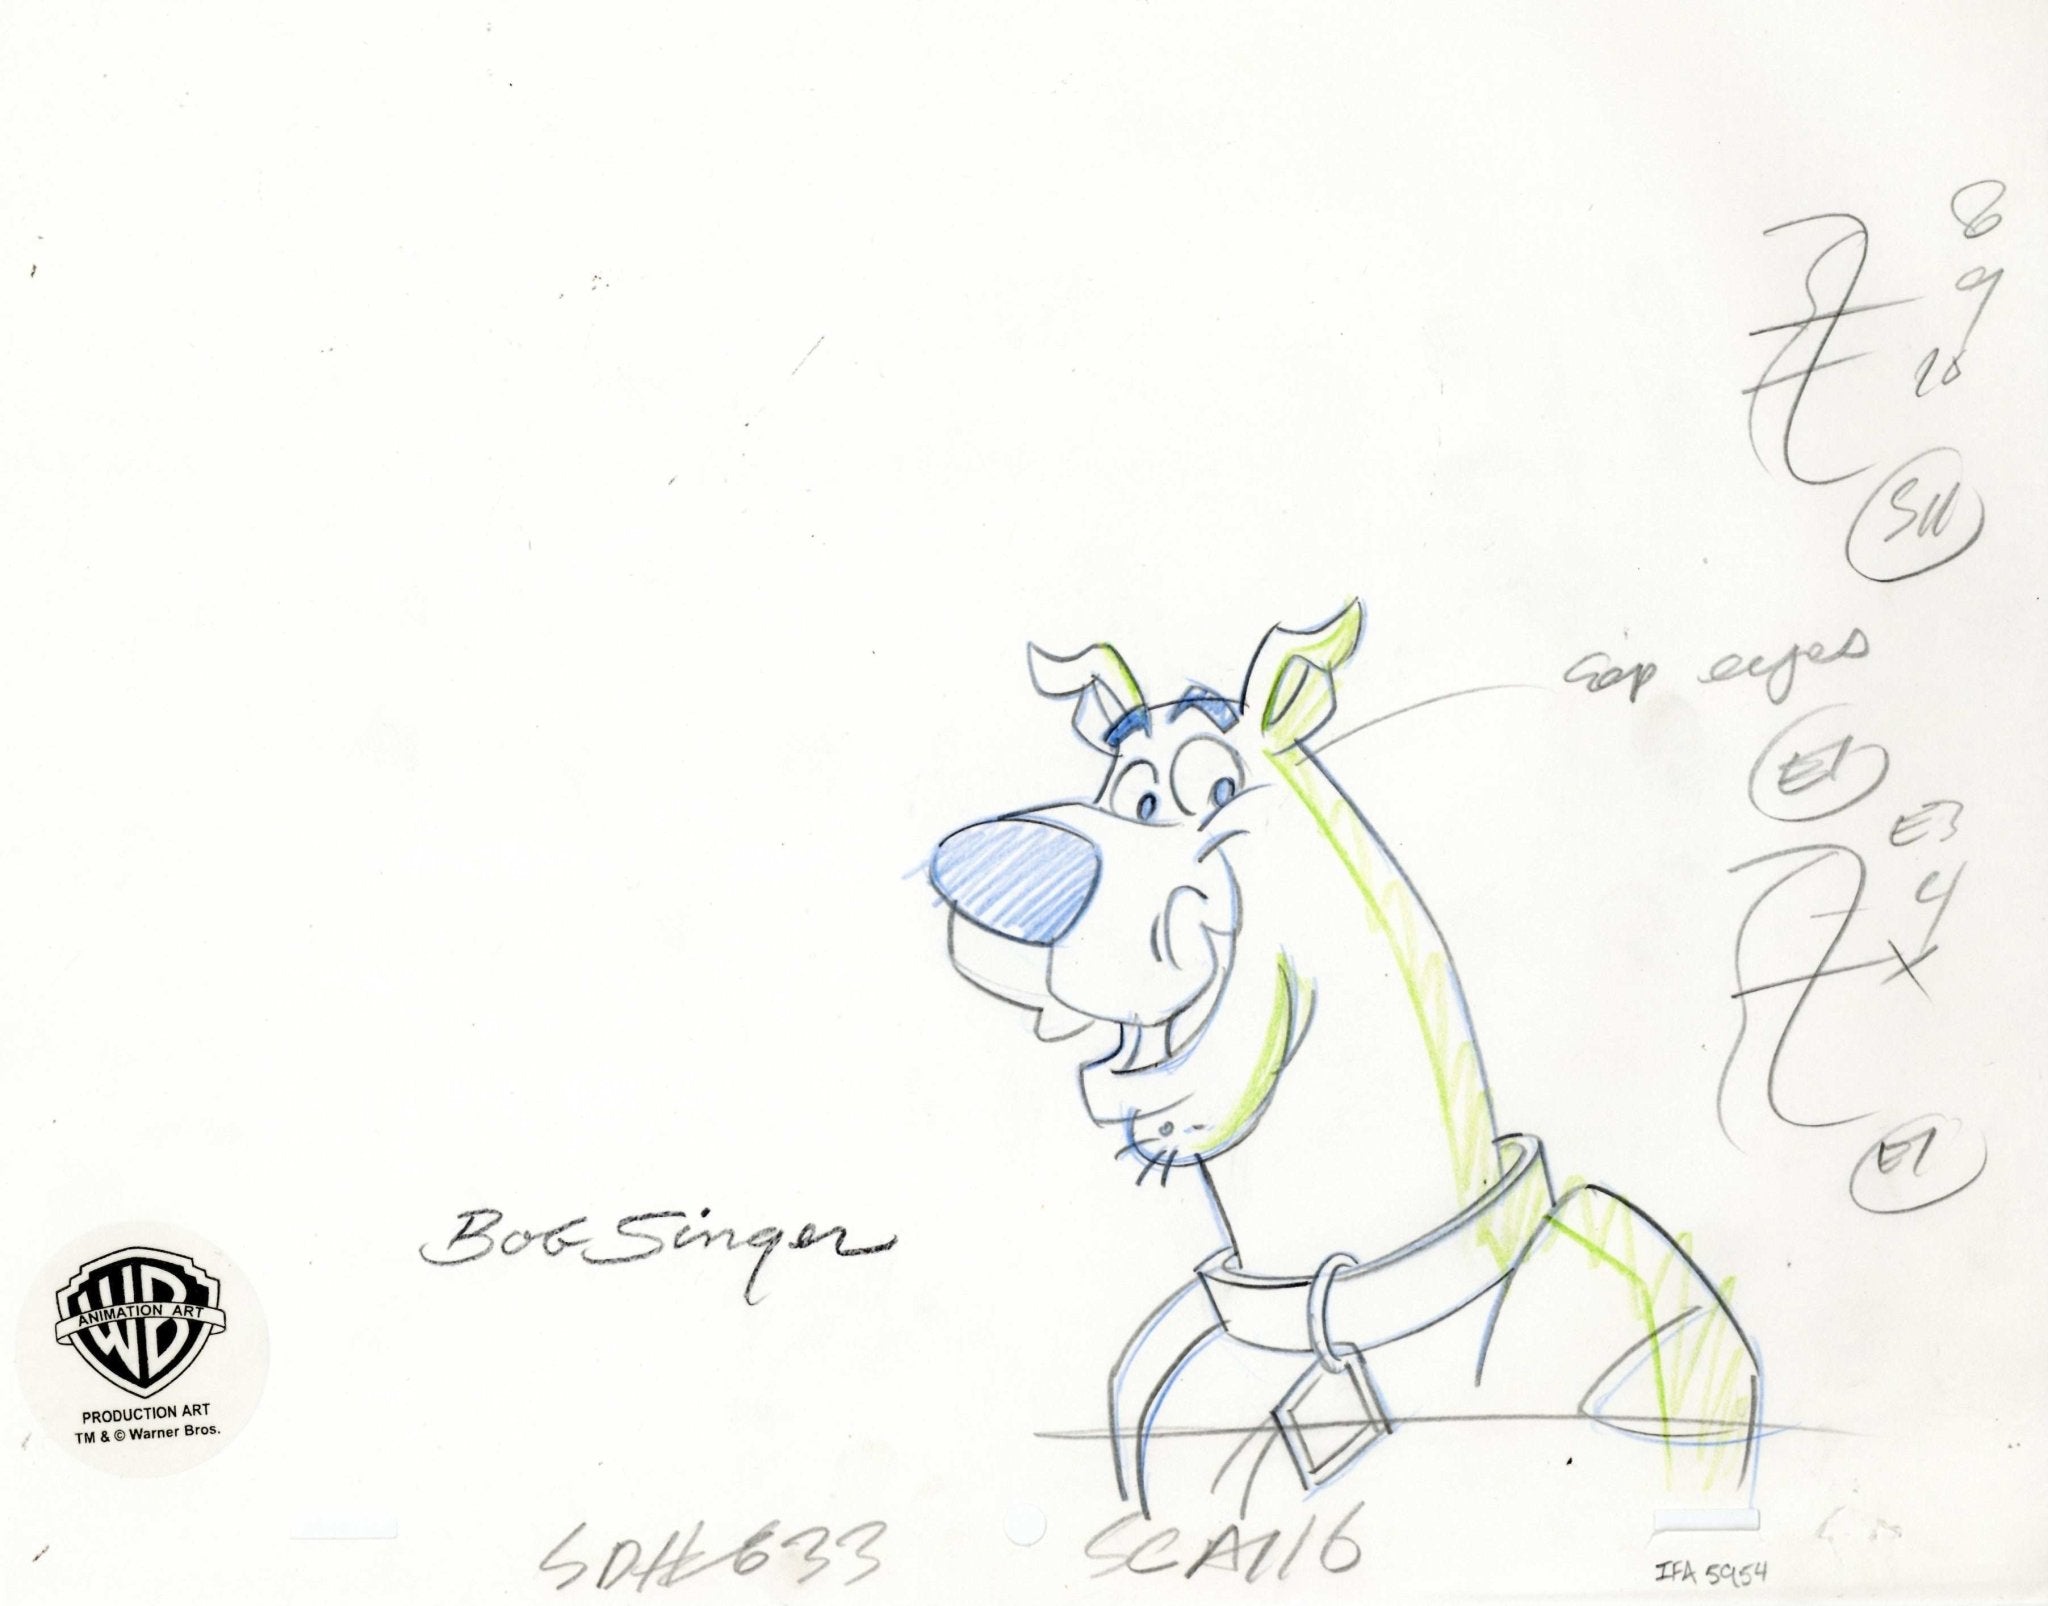 2 Lot Scooby Doo and Shaggy Hanna Barbera Large Pencil Drawings Signed by  Bob Singer at Amazon's Entertainment Collectibles Store